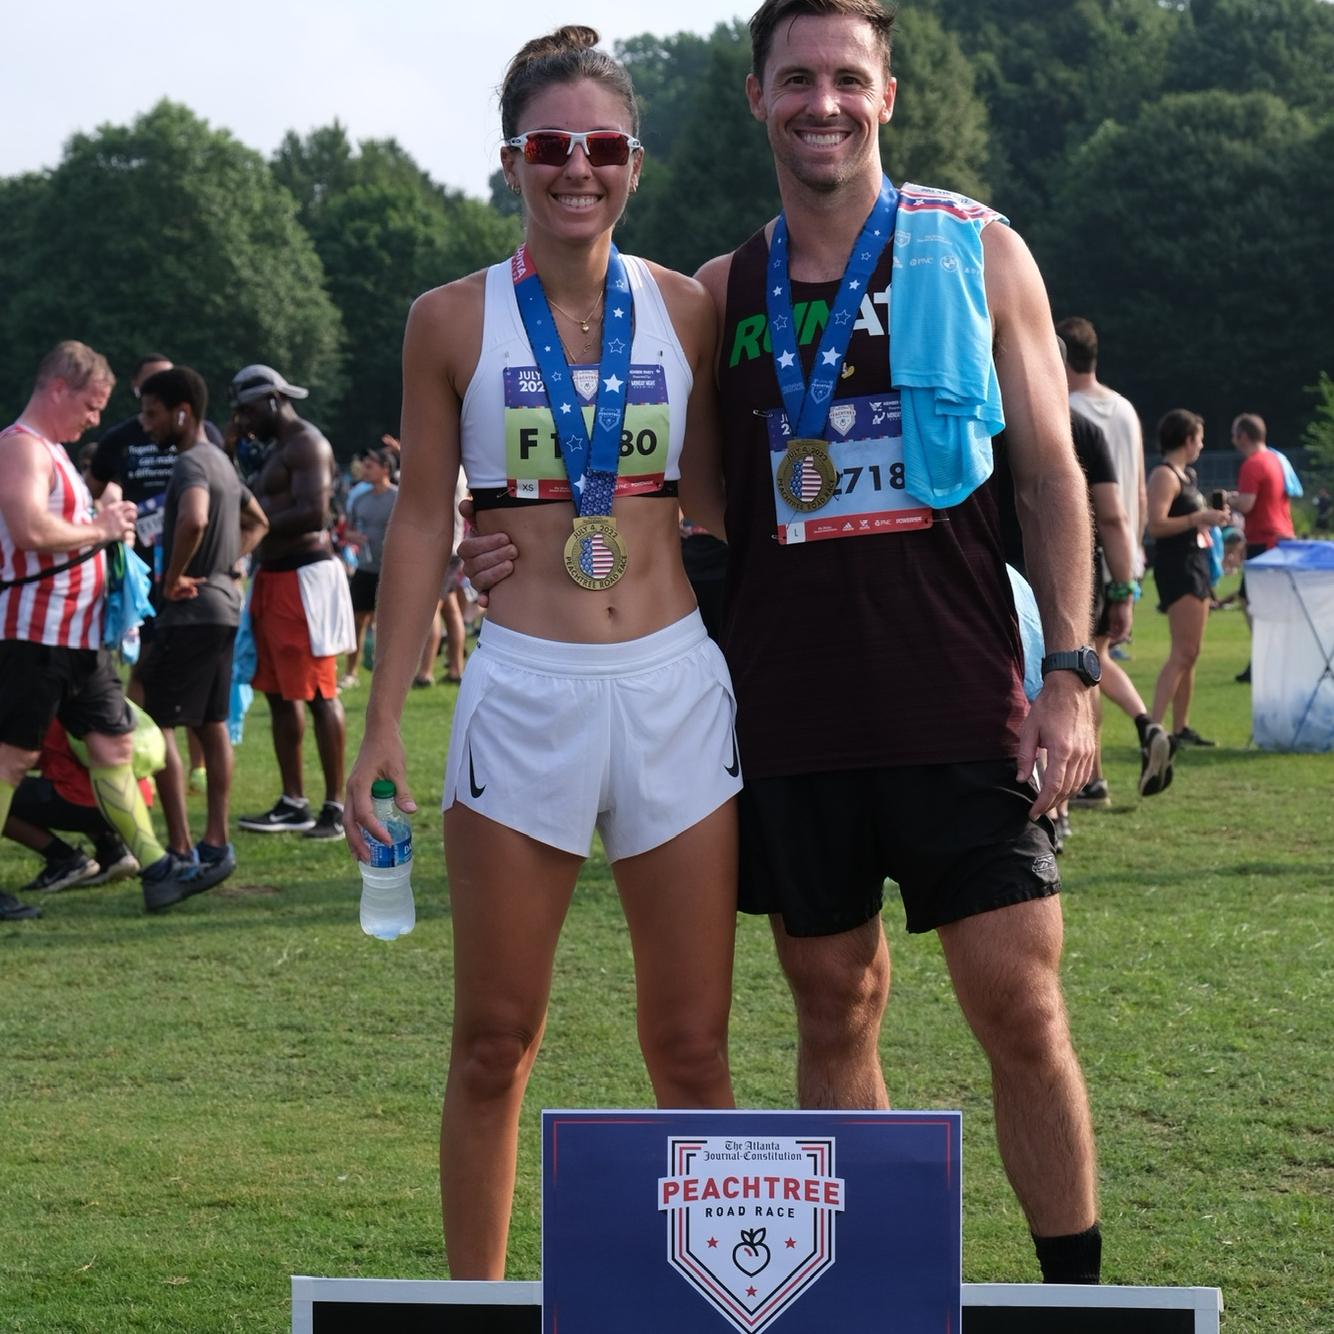 Our first 10K together, the Peachtree Road Race in Atlanta, GA!